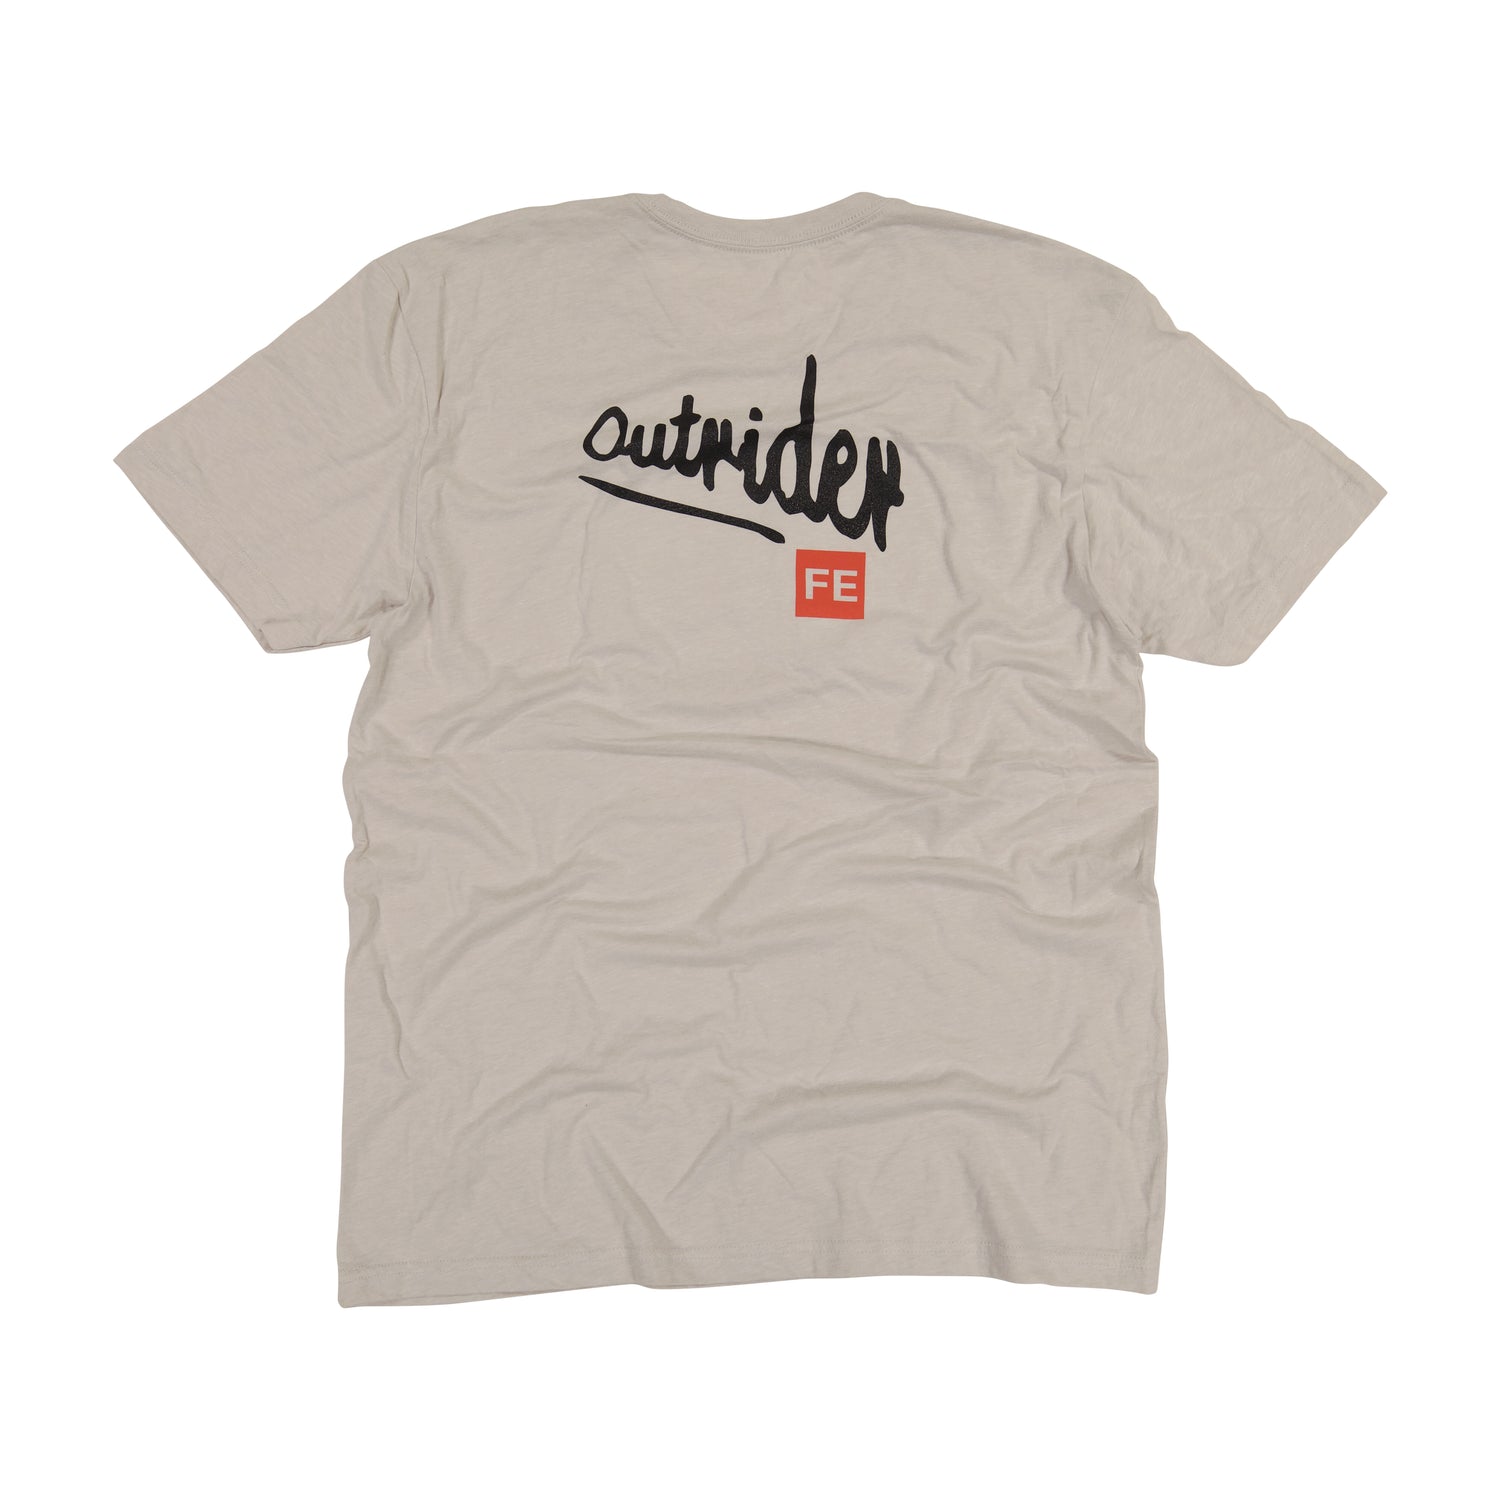 Outrider Tee